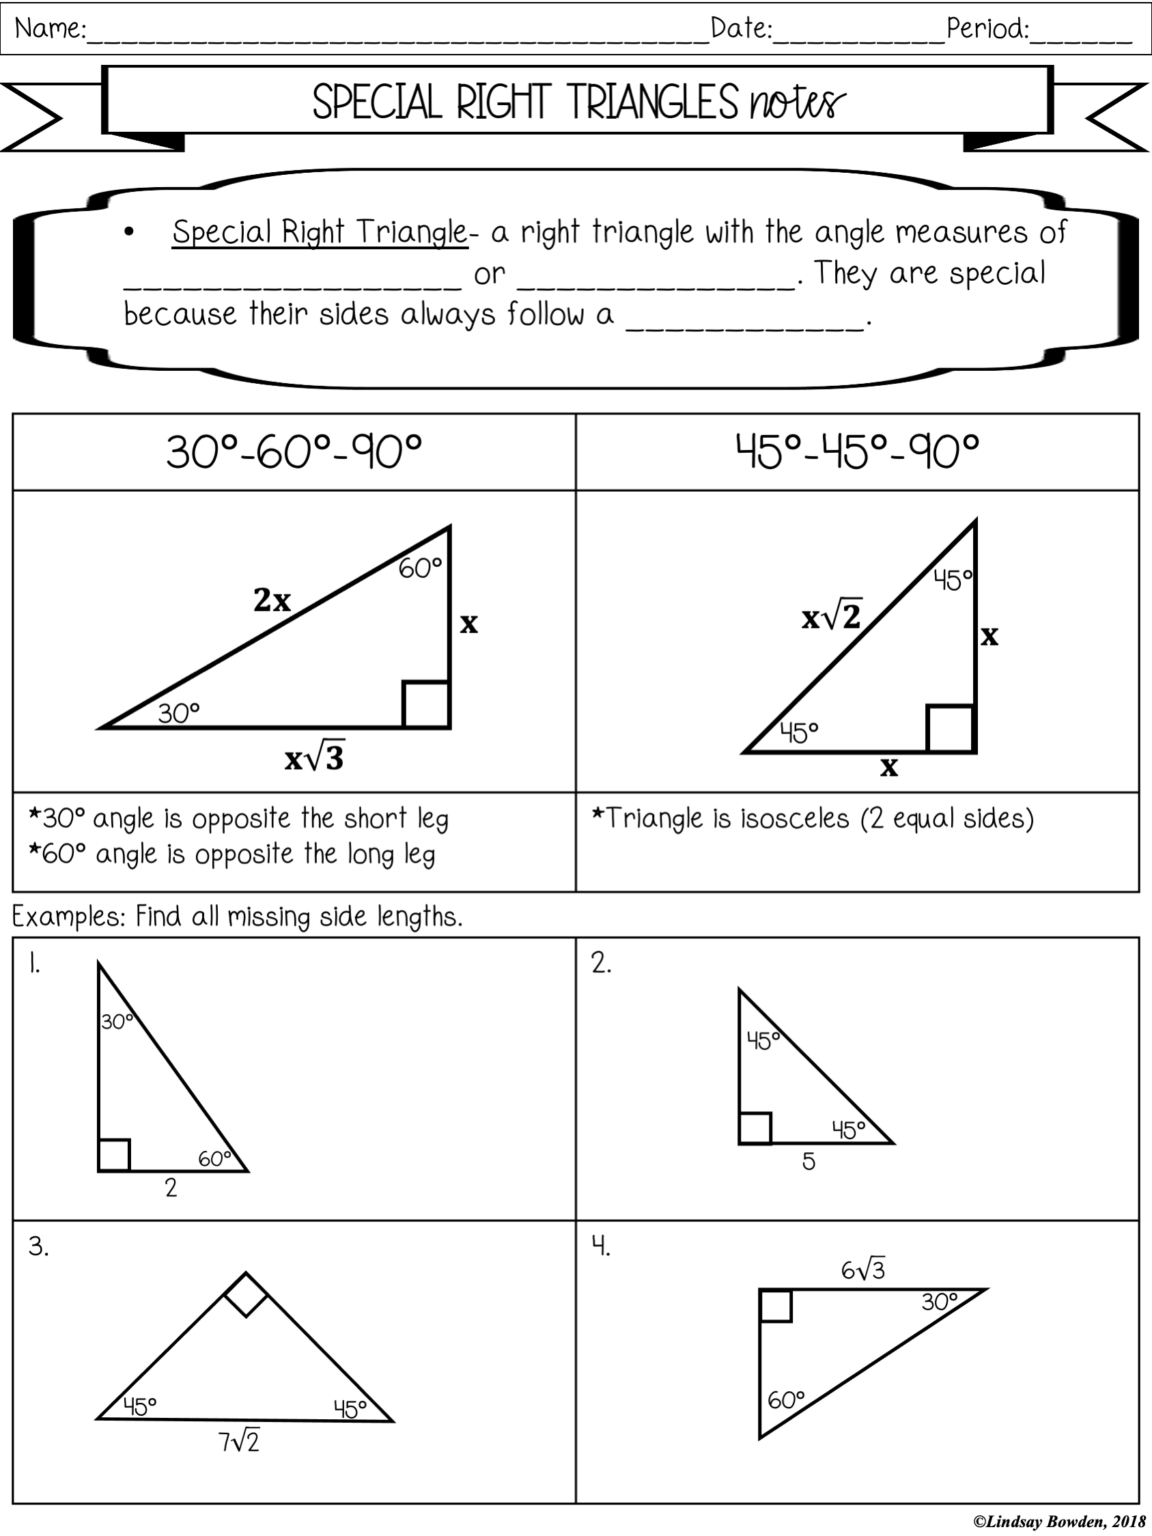 Special Right Triangles Practice Worksheet 3290